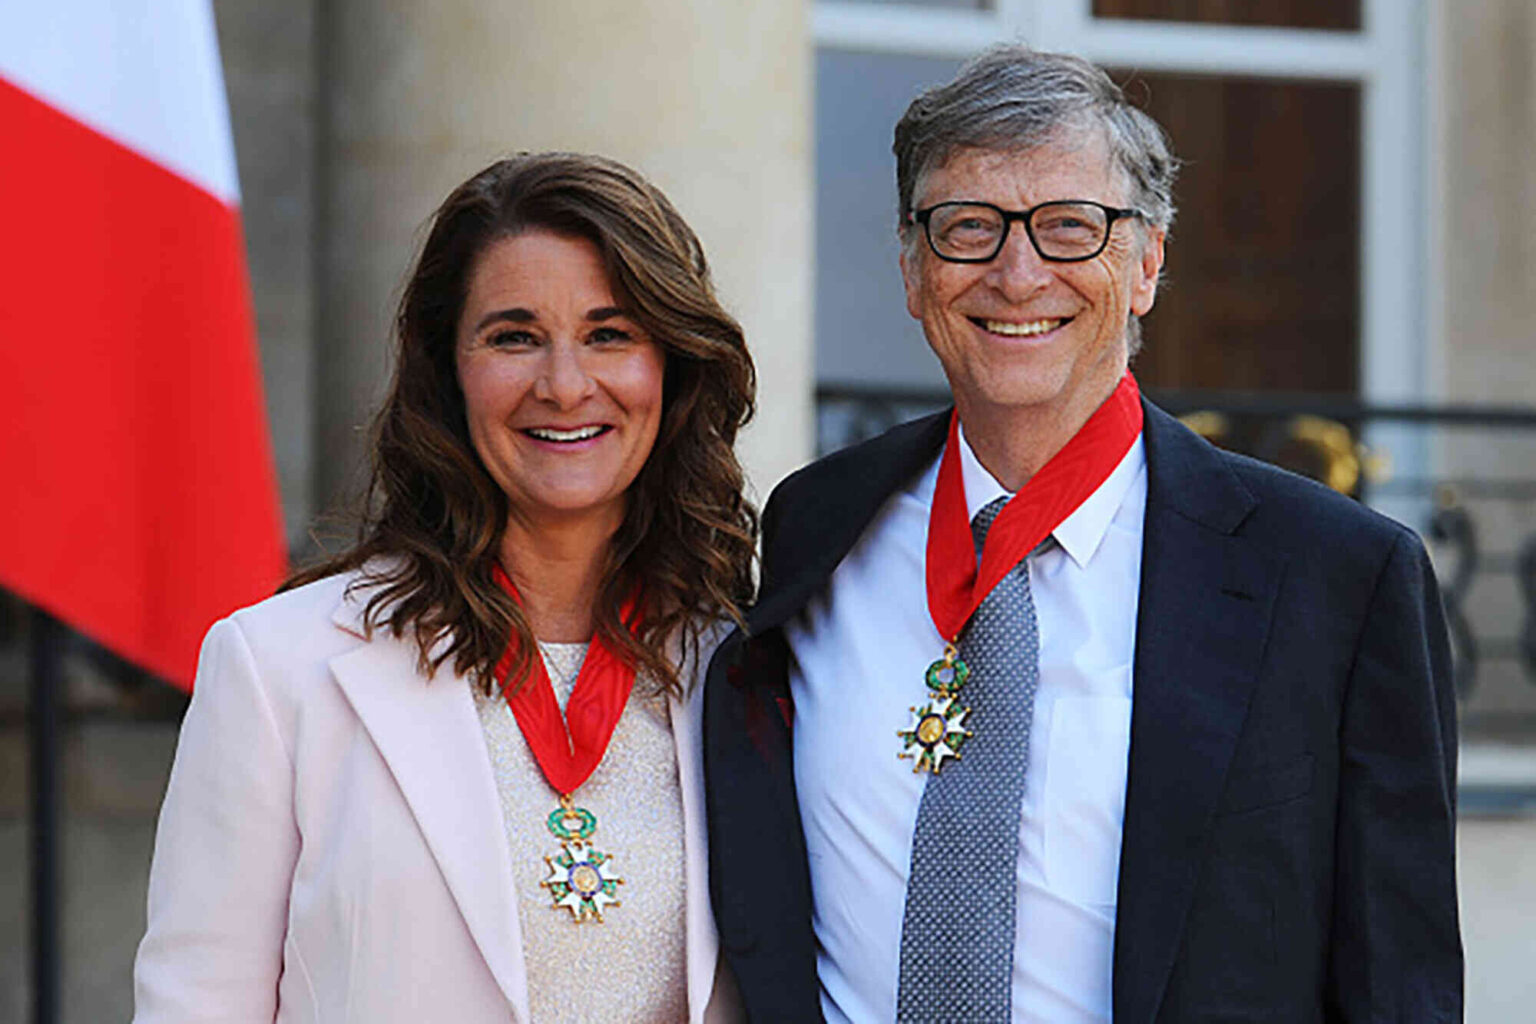 It’s official: the divorce of billionaire duo Bill and Melinda Gates has finally been approved, but now what will become of the successful Gates Foundation?